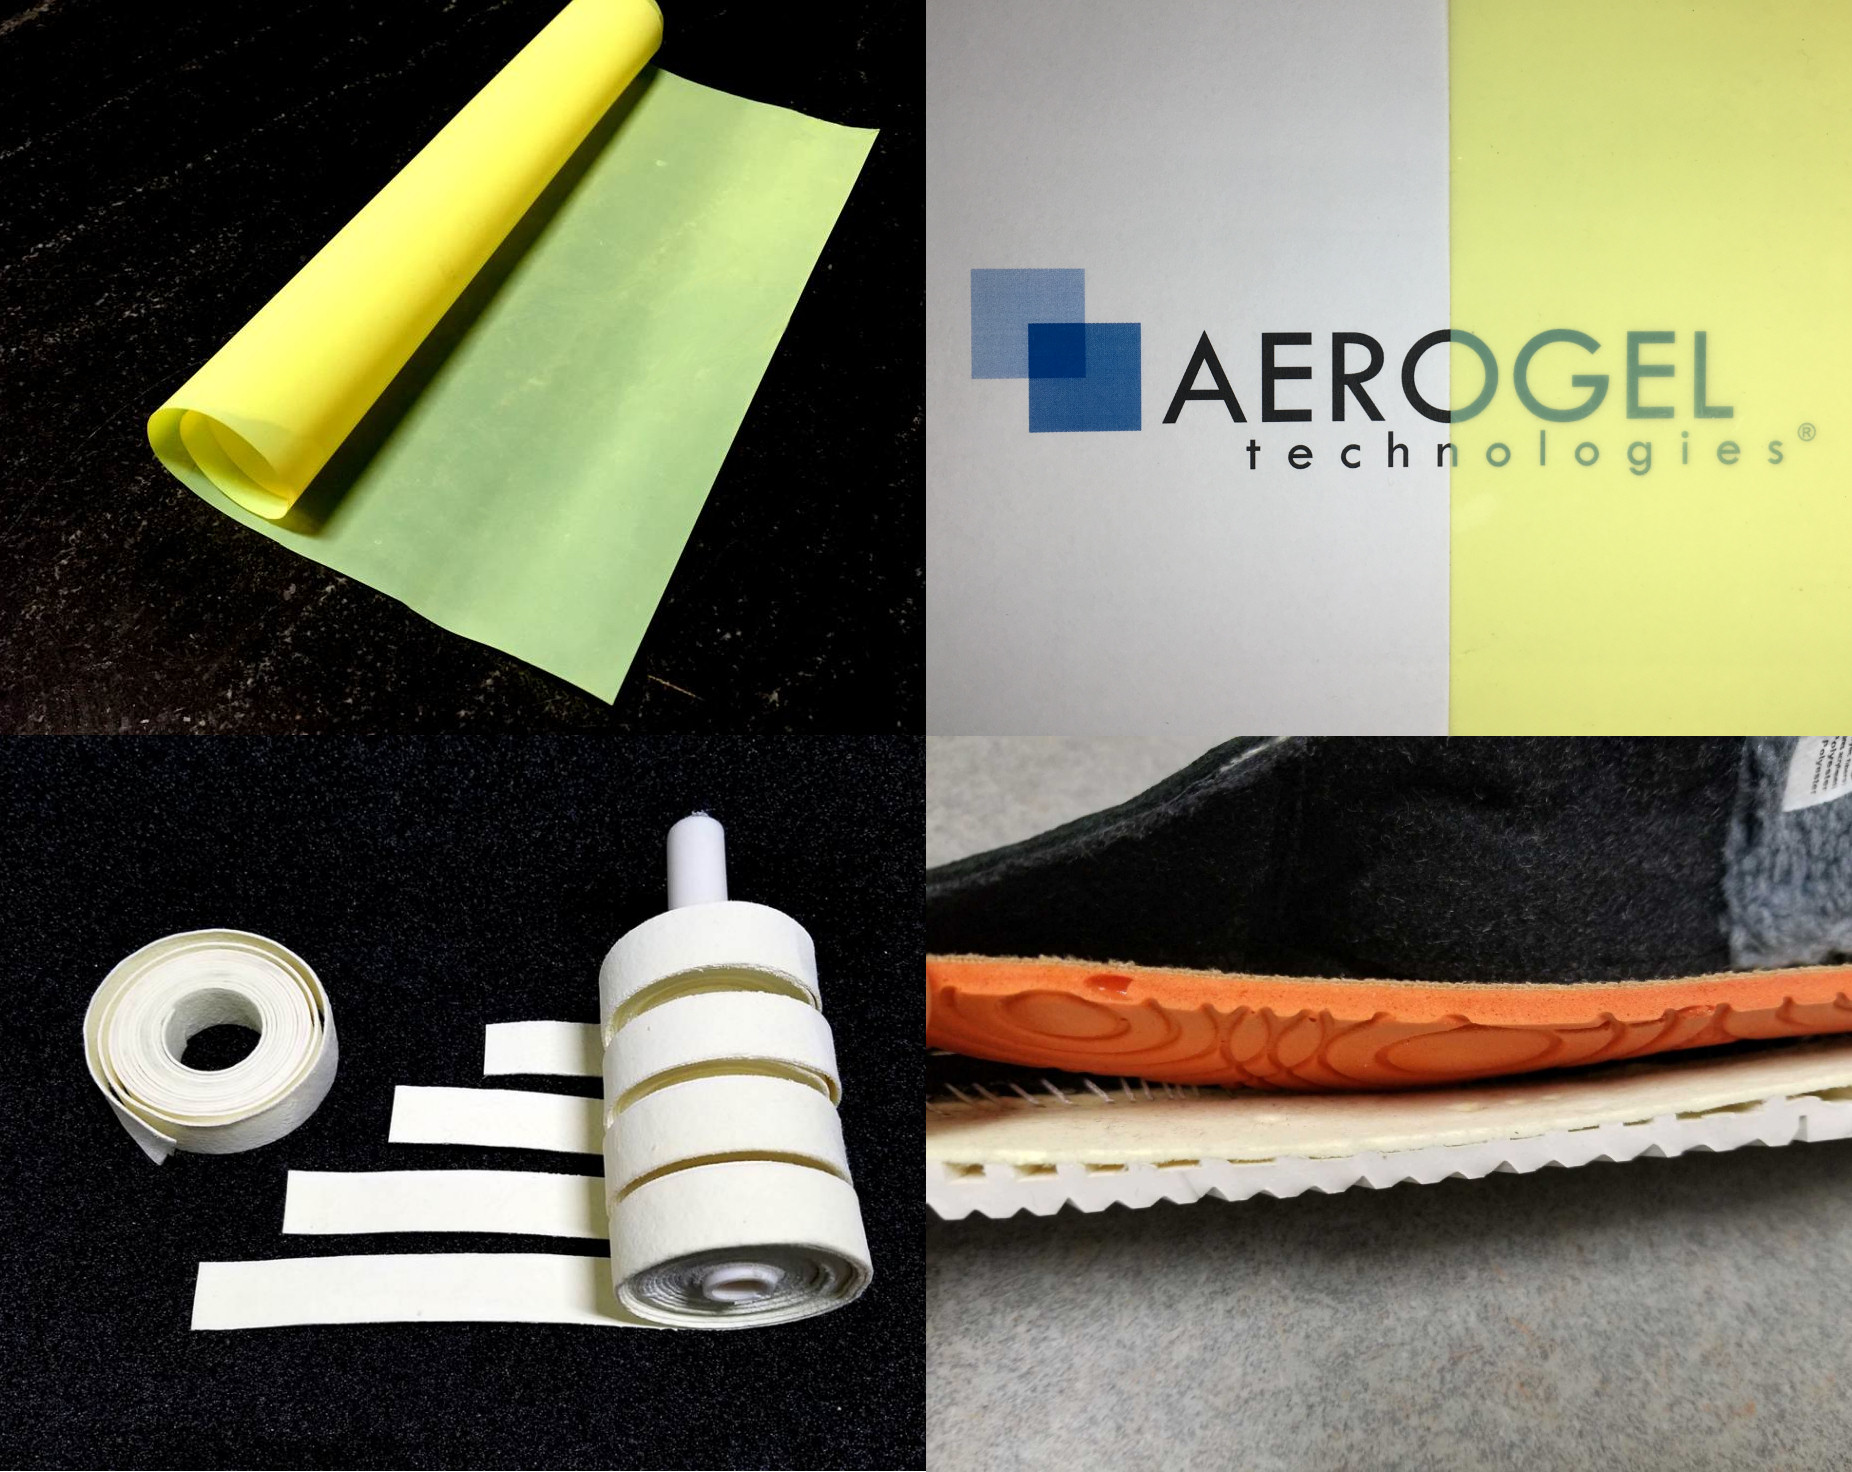 New polyimide aerogel products from Aerogel Technologies. Top left: Airloy X116 thin film; top right: transparent 5-mil film; bottom left: high-temperature waterproof Airloy HR116 tape; lower right: c